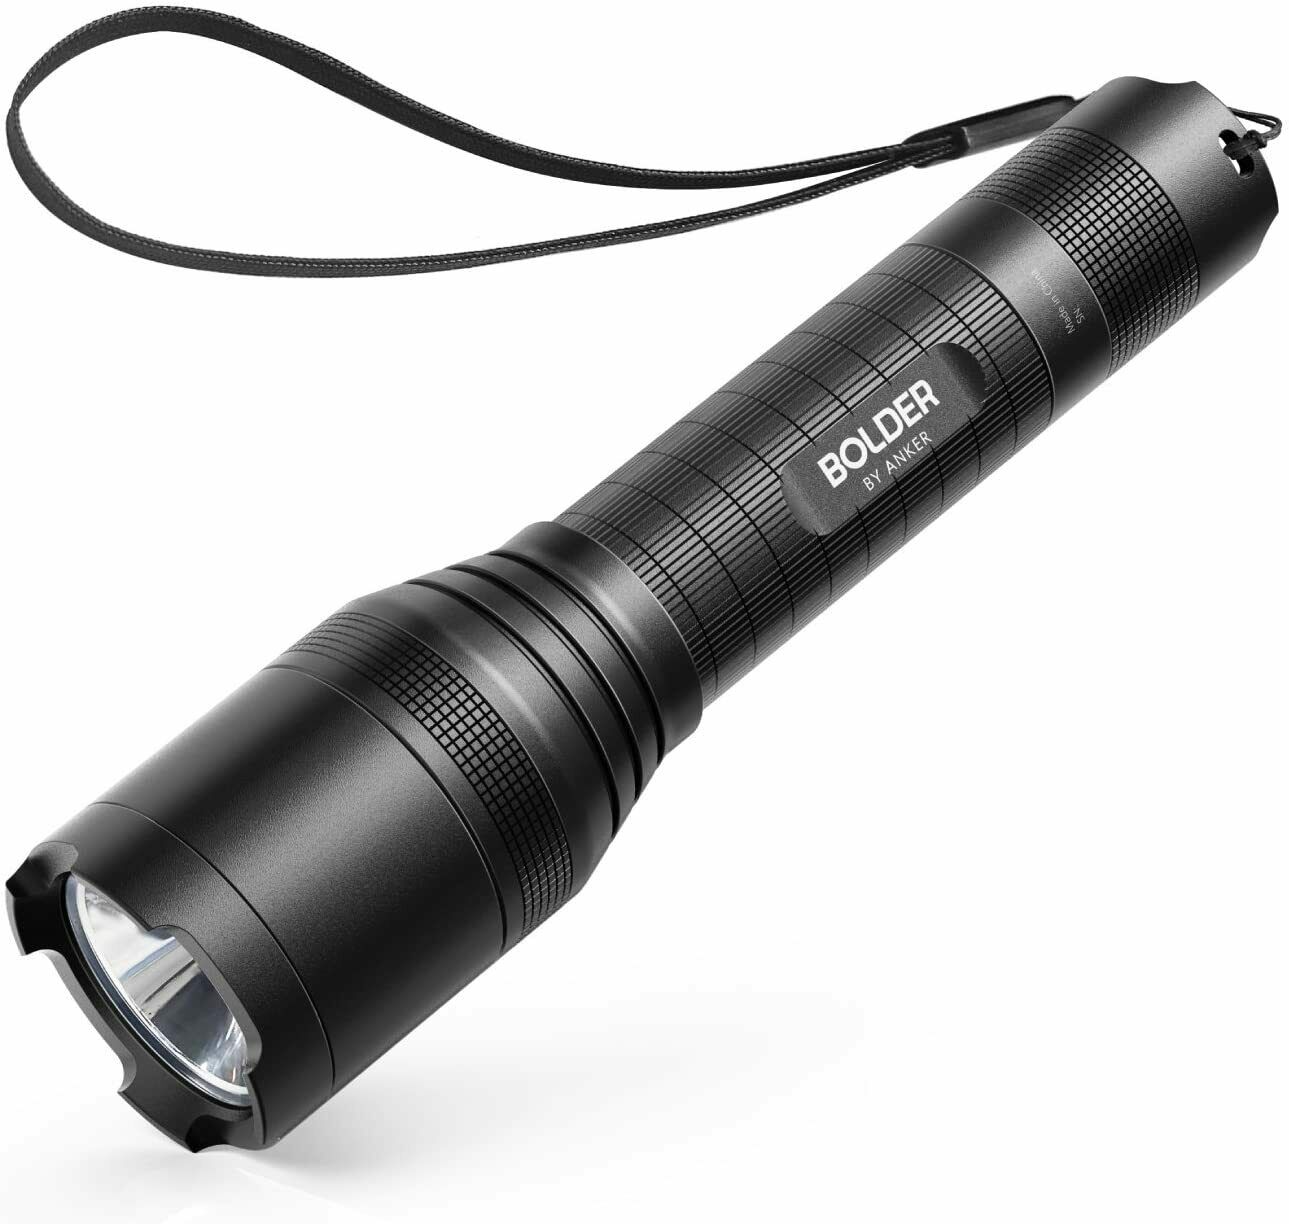 Anker Bolder LC90 900 Lumens Rechargeable Cree LED Flashlight (Refurbished) $15.49 + Free Shipping